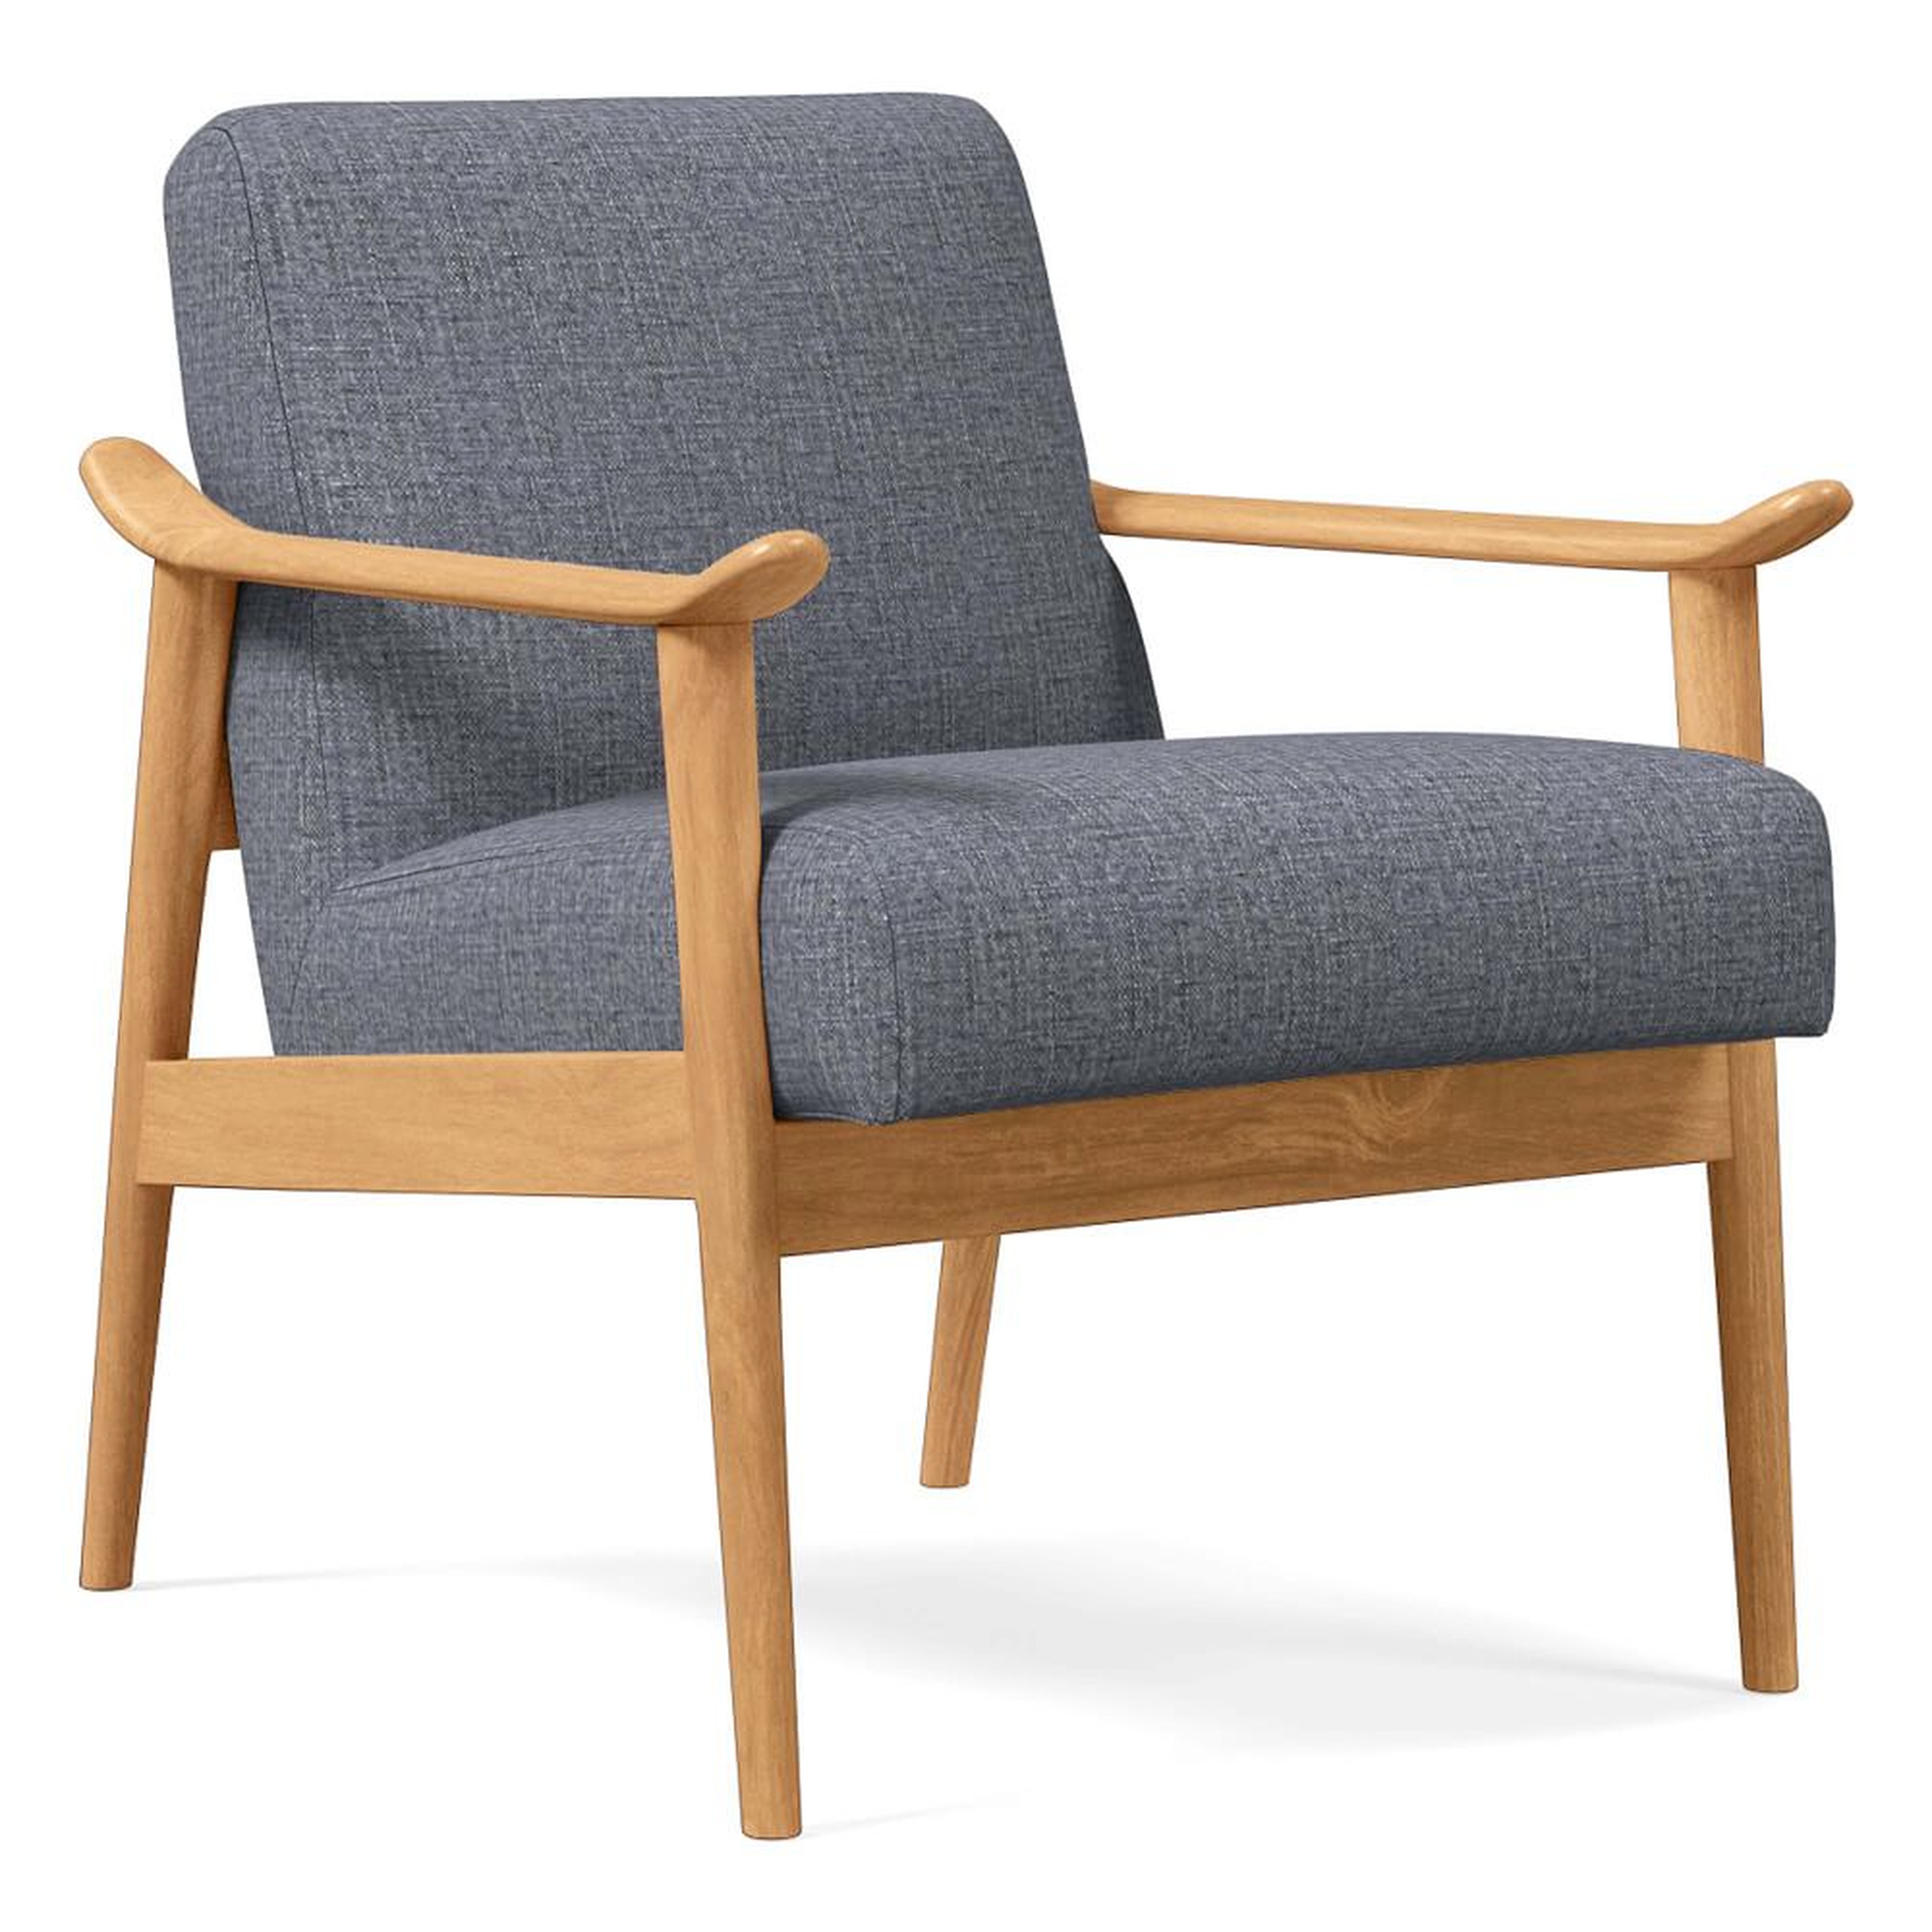 Mid Century Showwood Chair, Poly, Yarn Dyed Linen Weave, Graphite, Natural Oak - West Elm